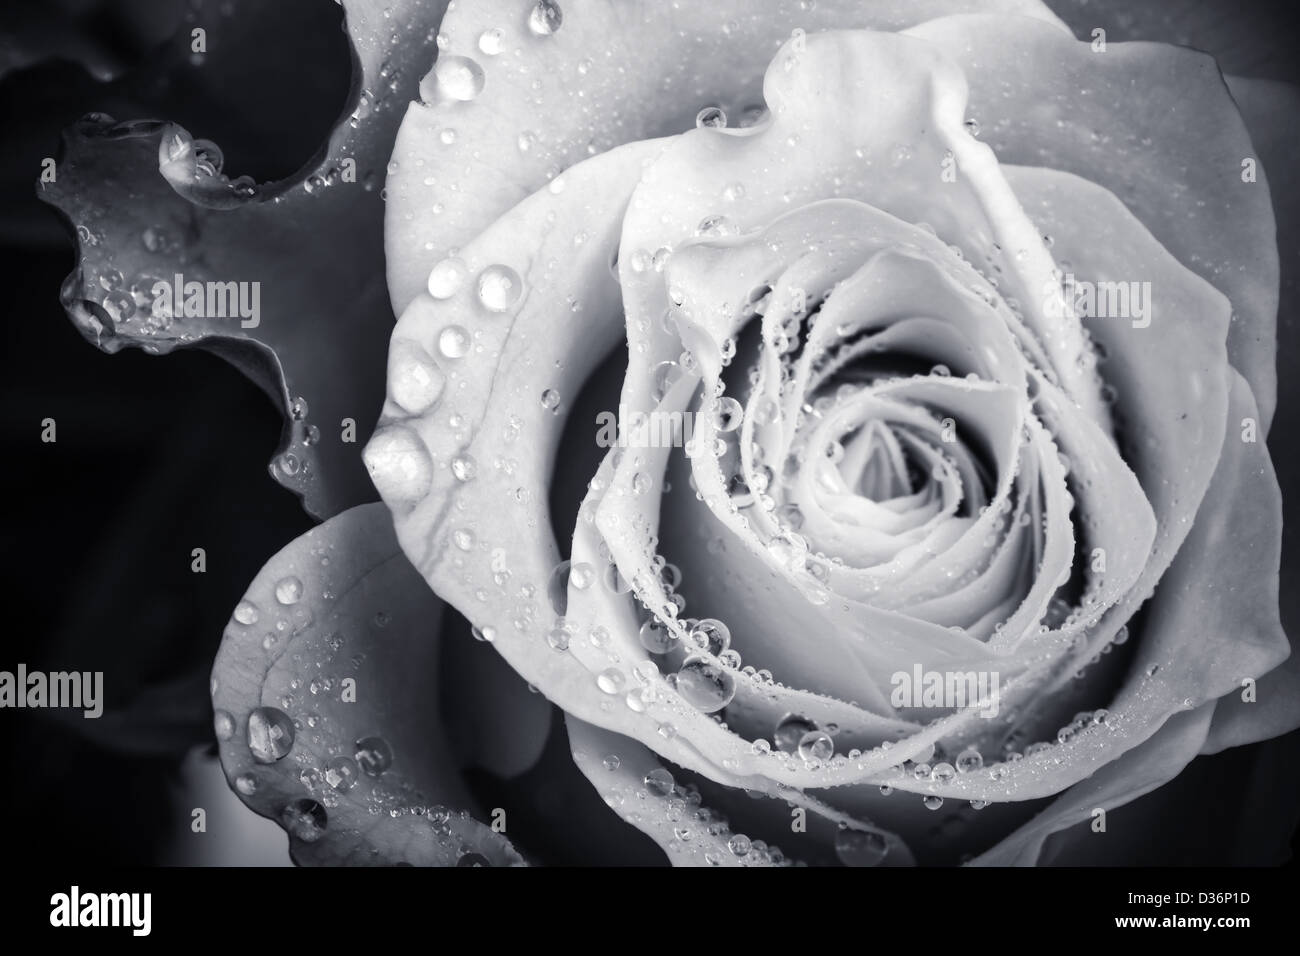 Wet white rose flower monochrome close-up photo with shallow depth of field Stock Photo